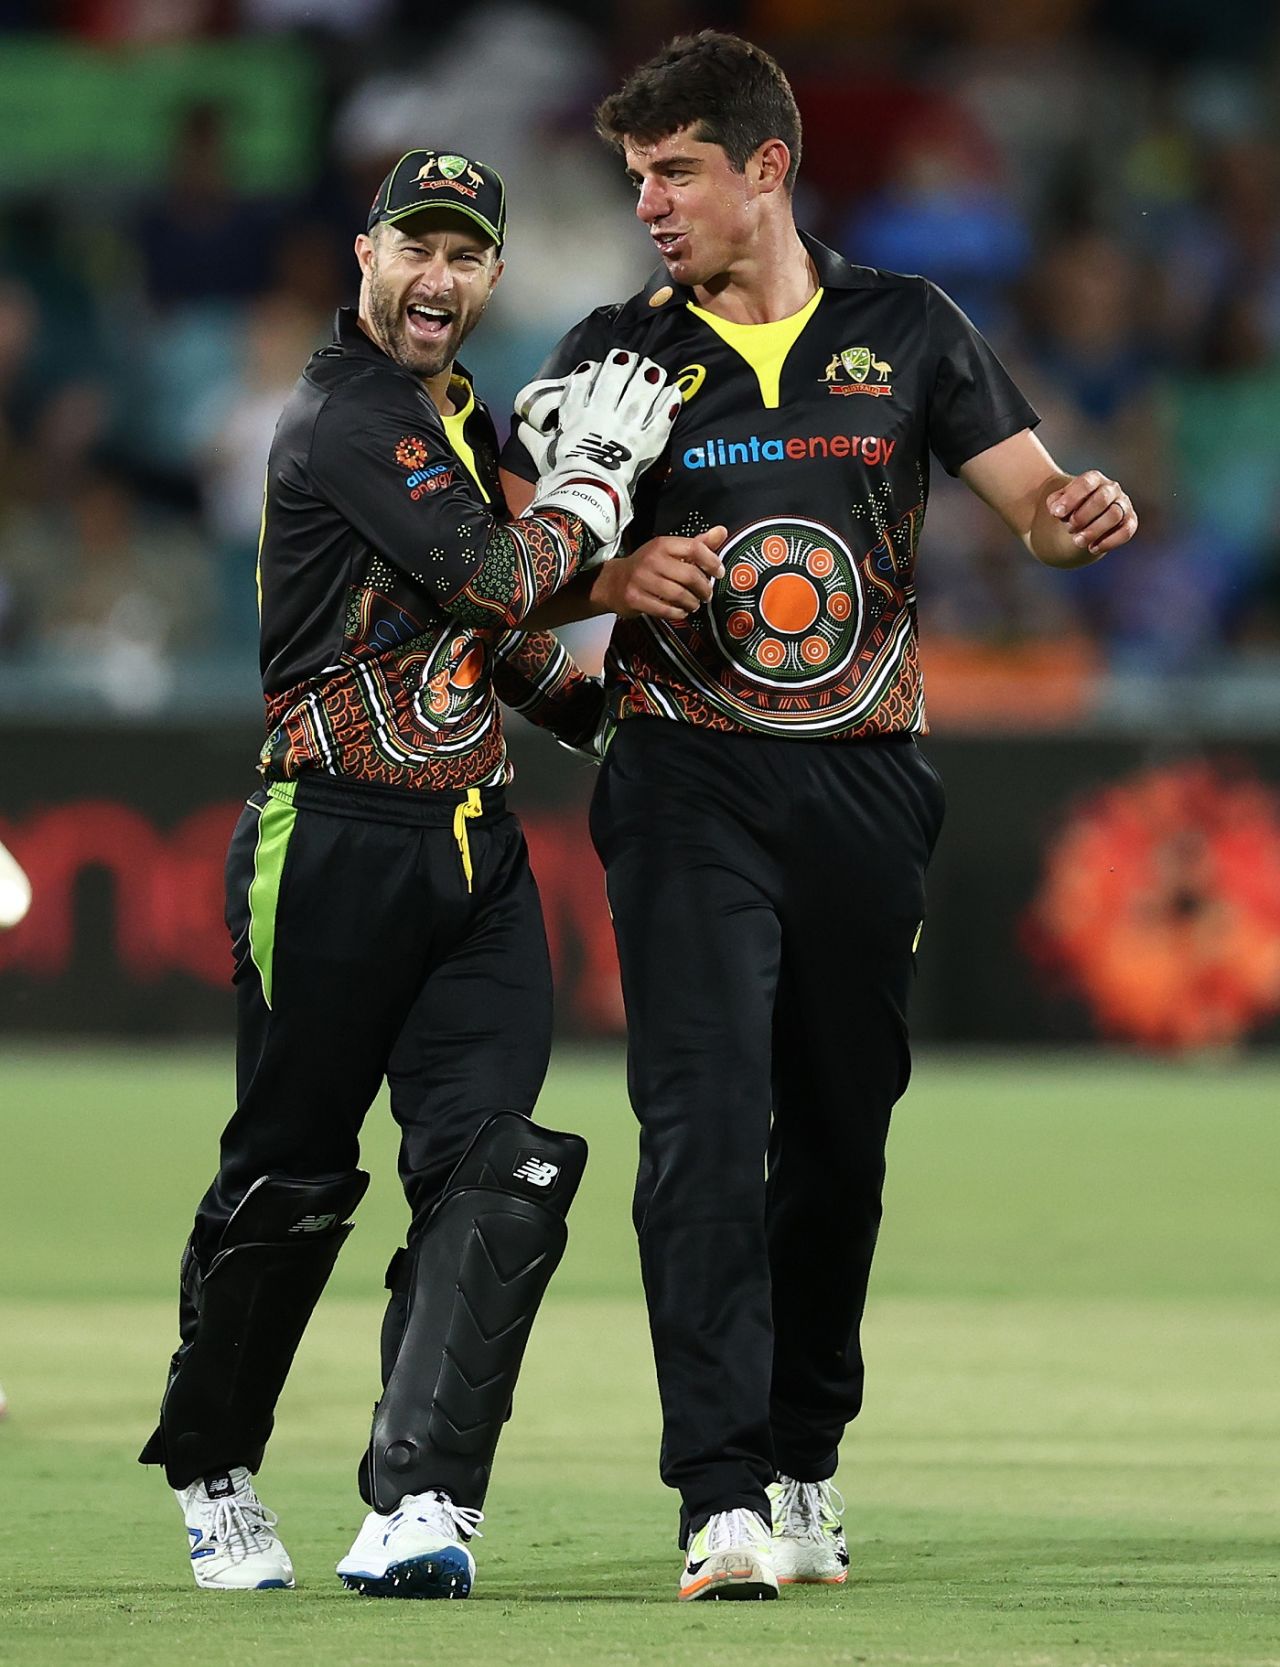 Moises Henriques celebrates a wicket with Matthew Wade, Australia vs India, 1st T20I, Canberra, December 4, 2020